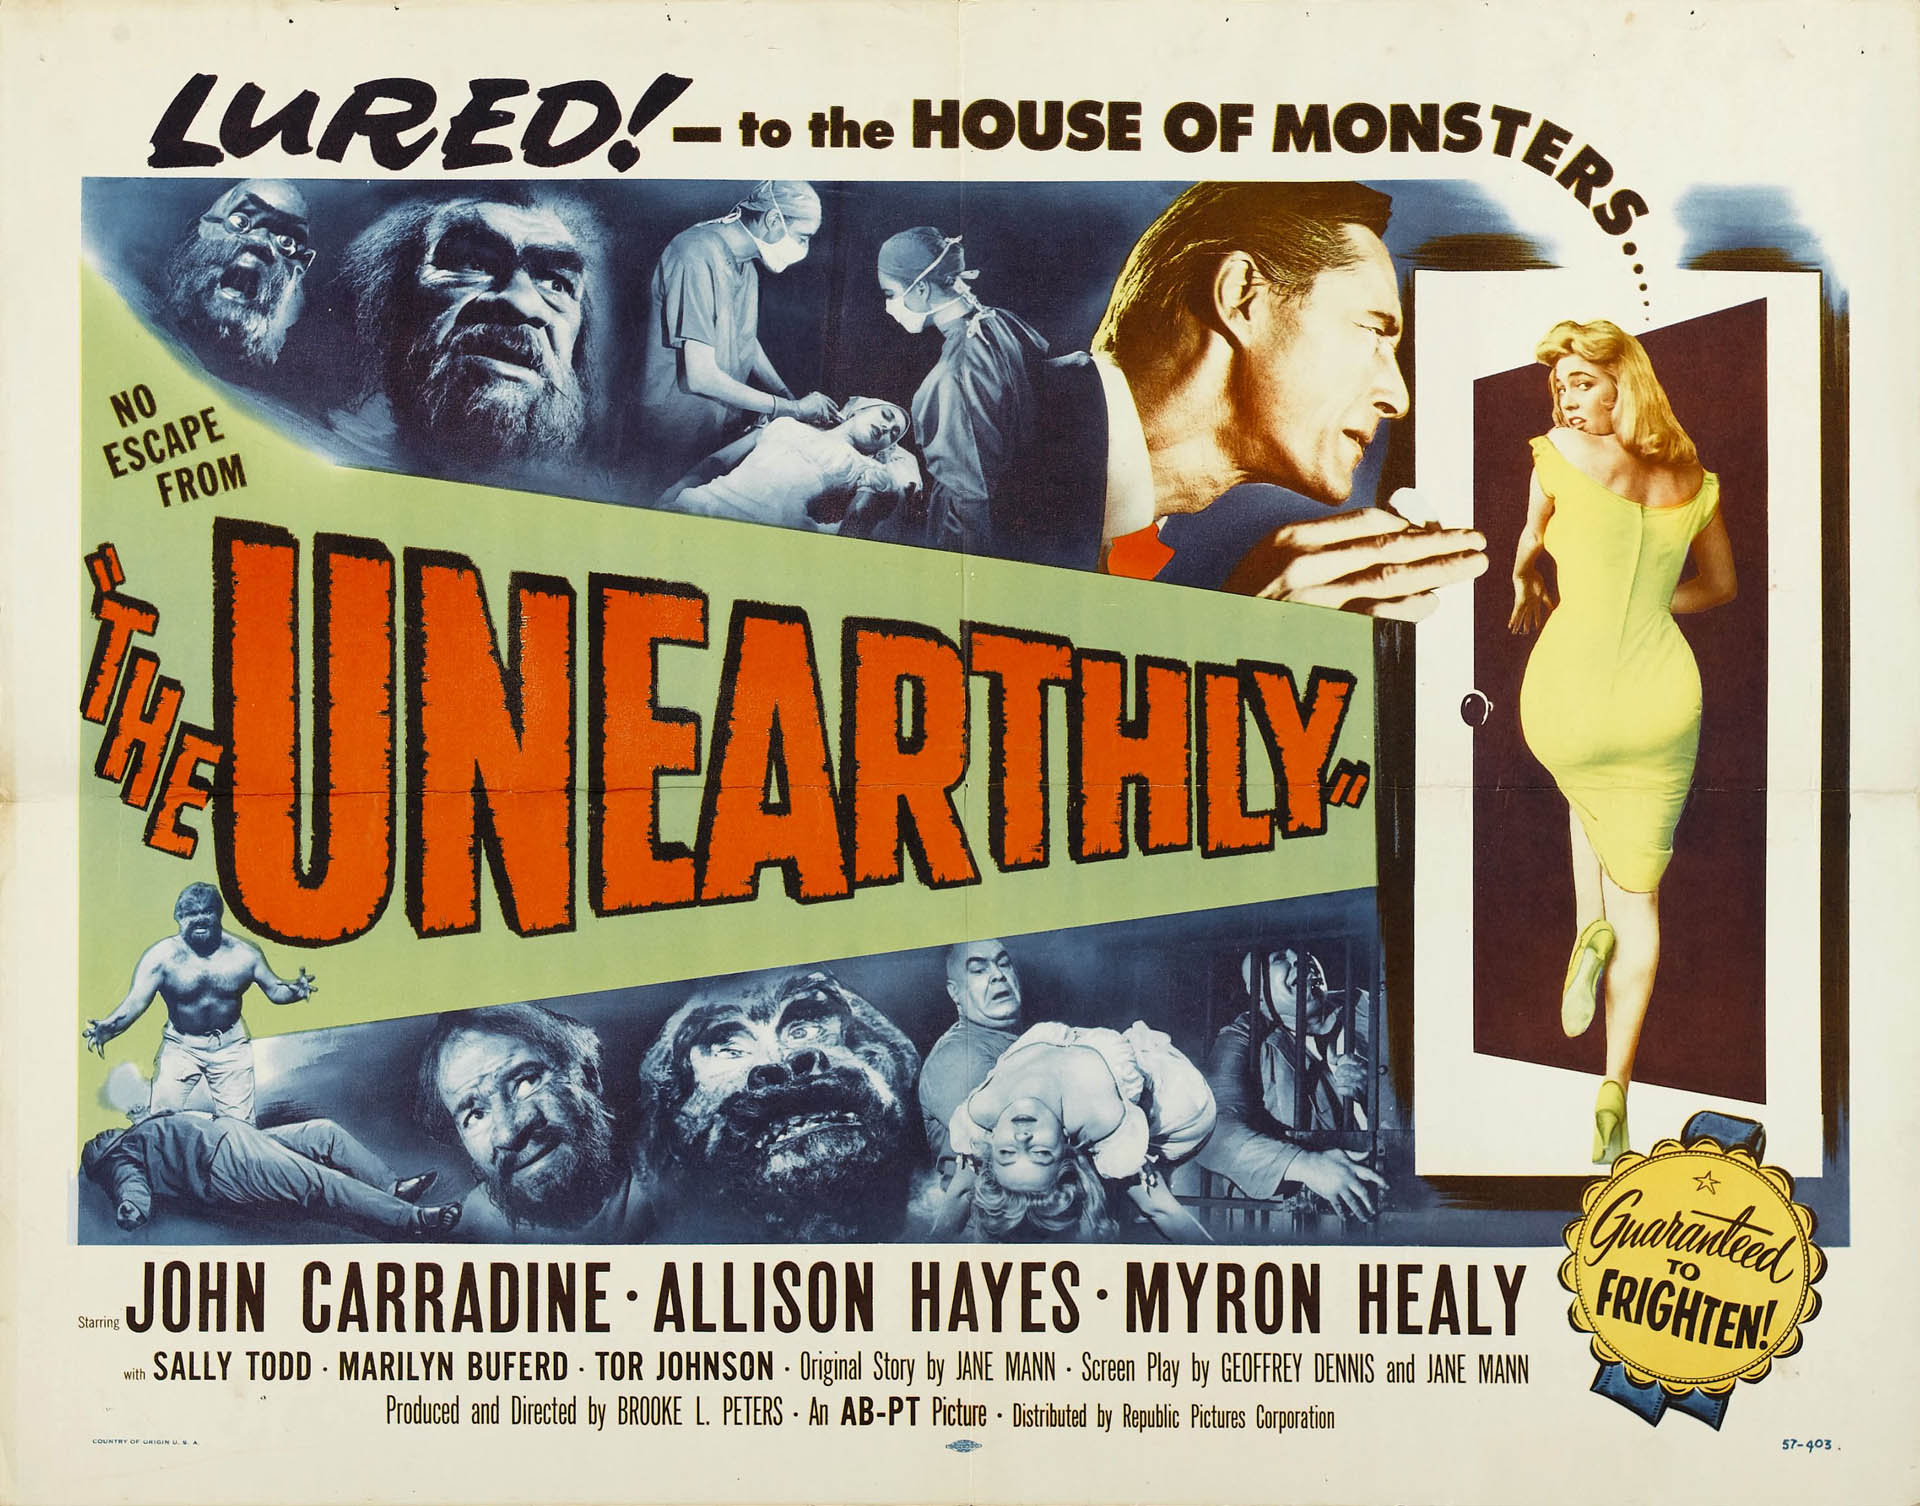 The Unearthly #5